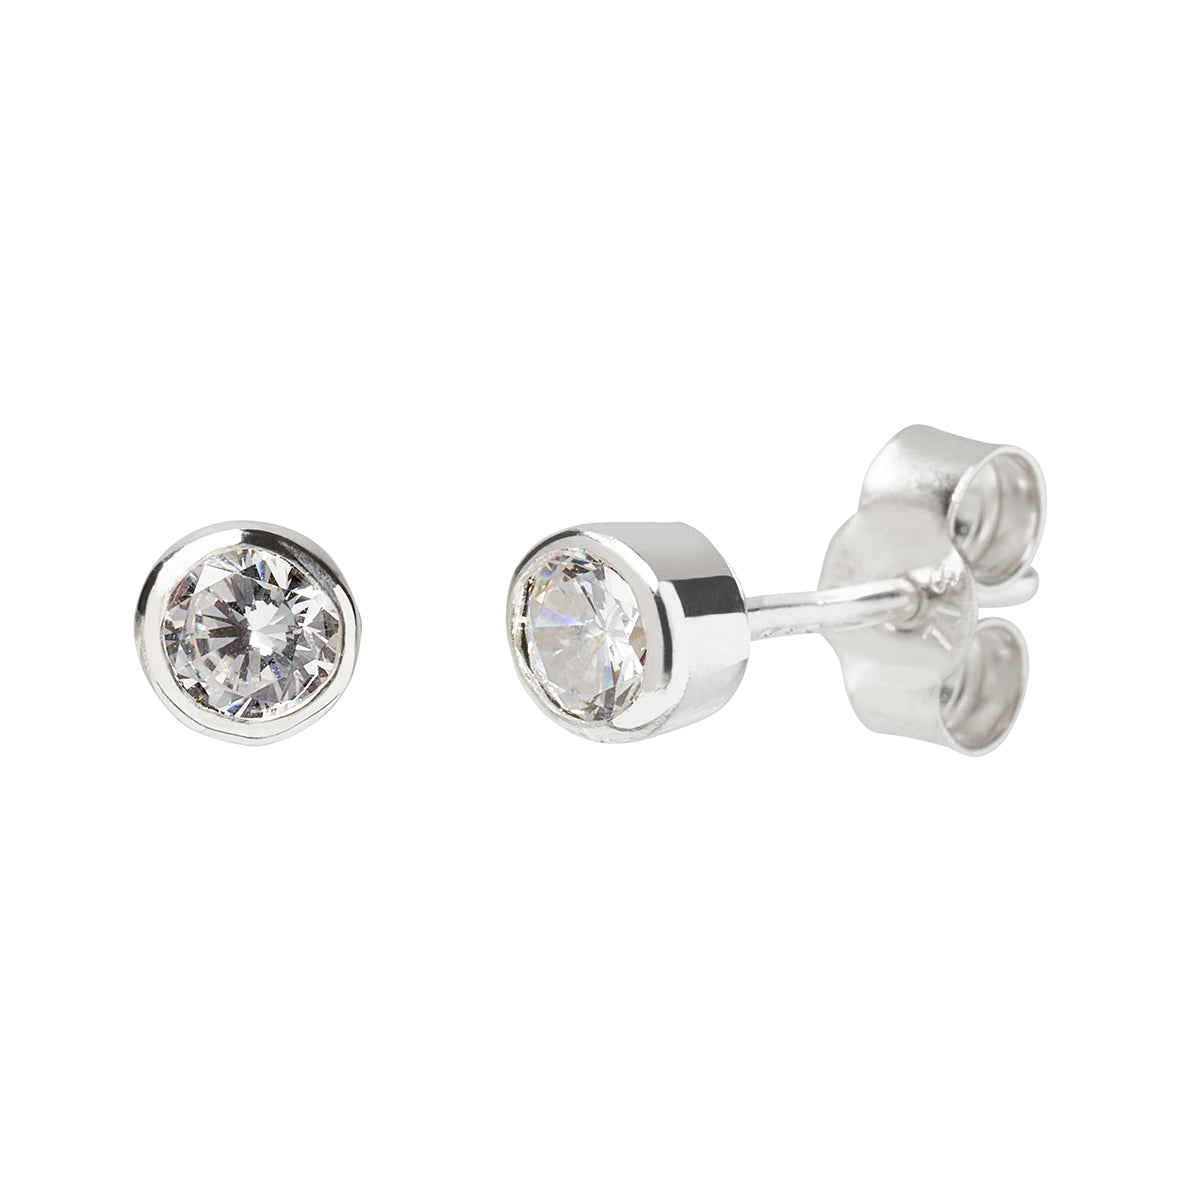 Cubic Zirconia and Silver Stud Earrings